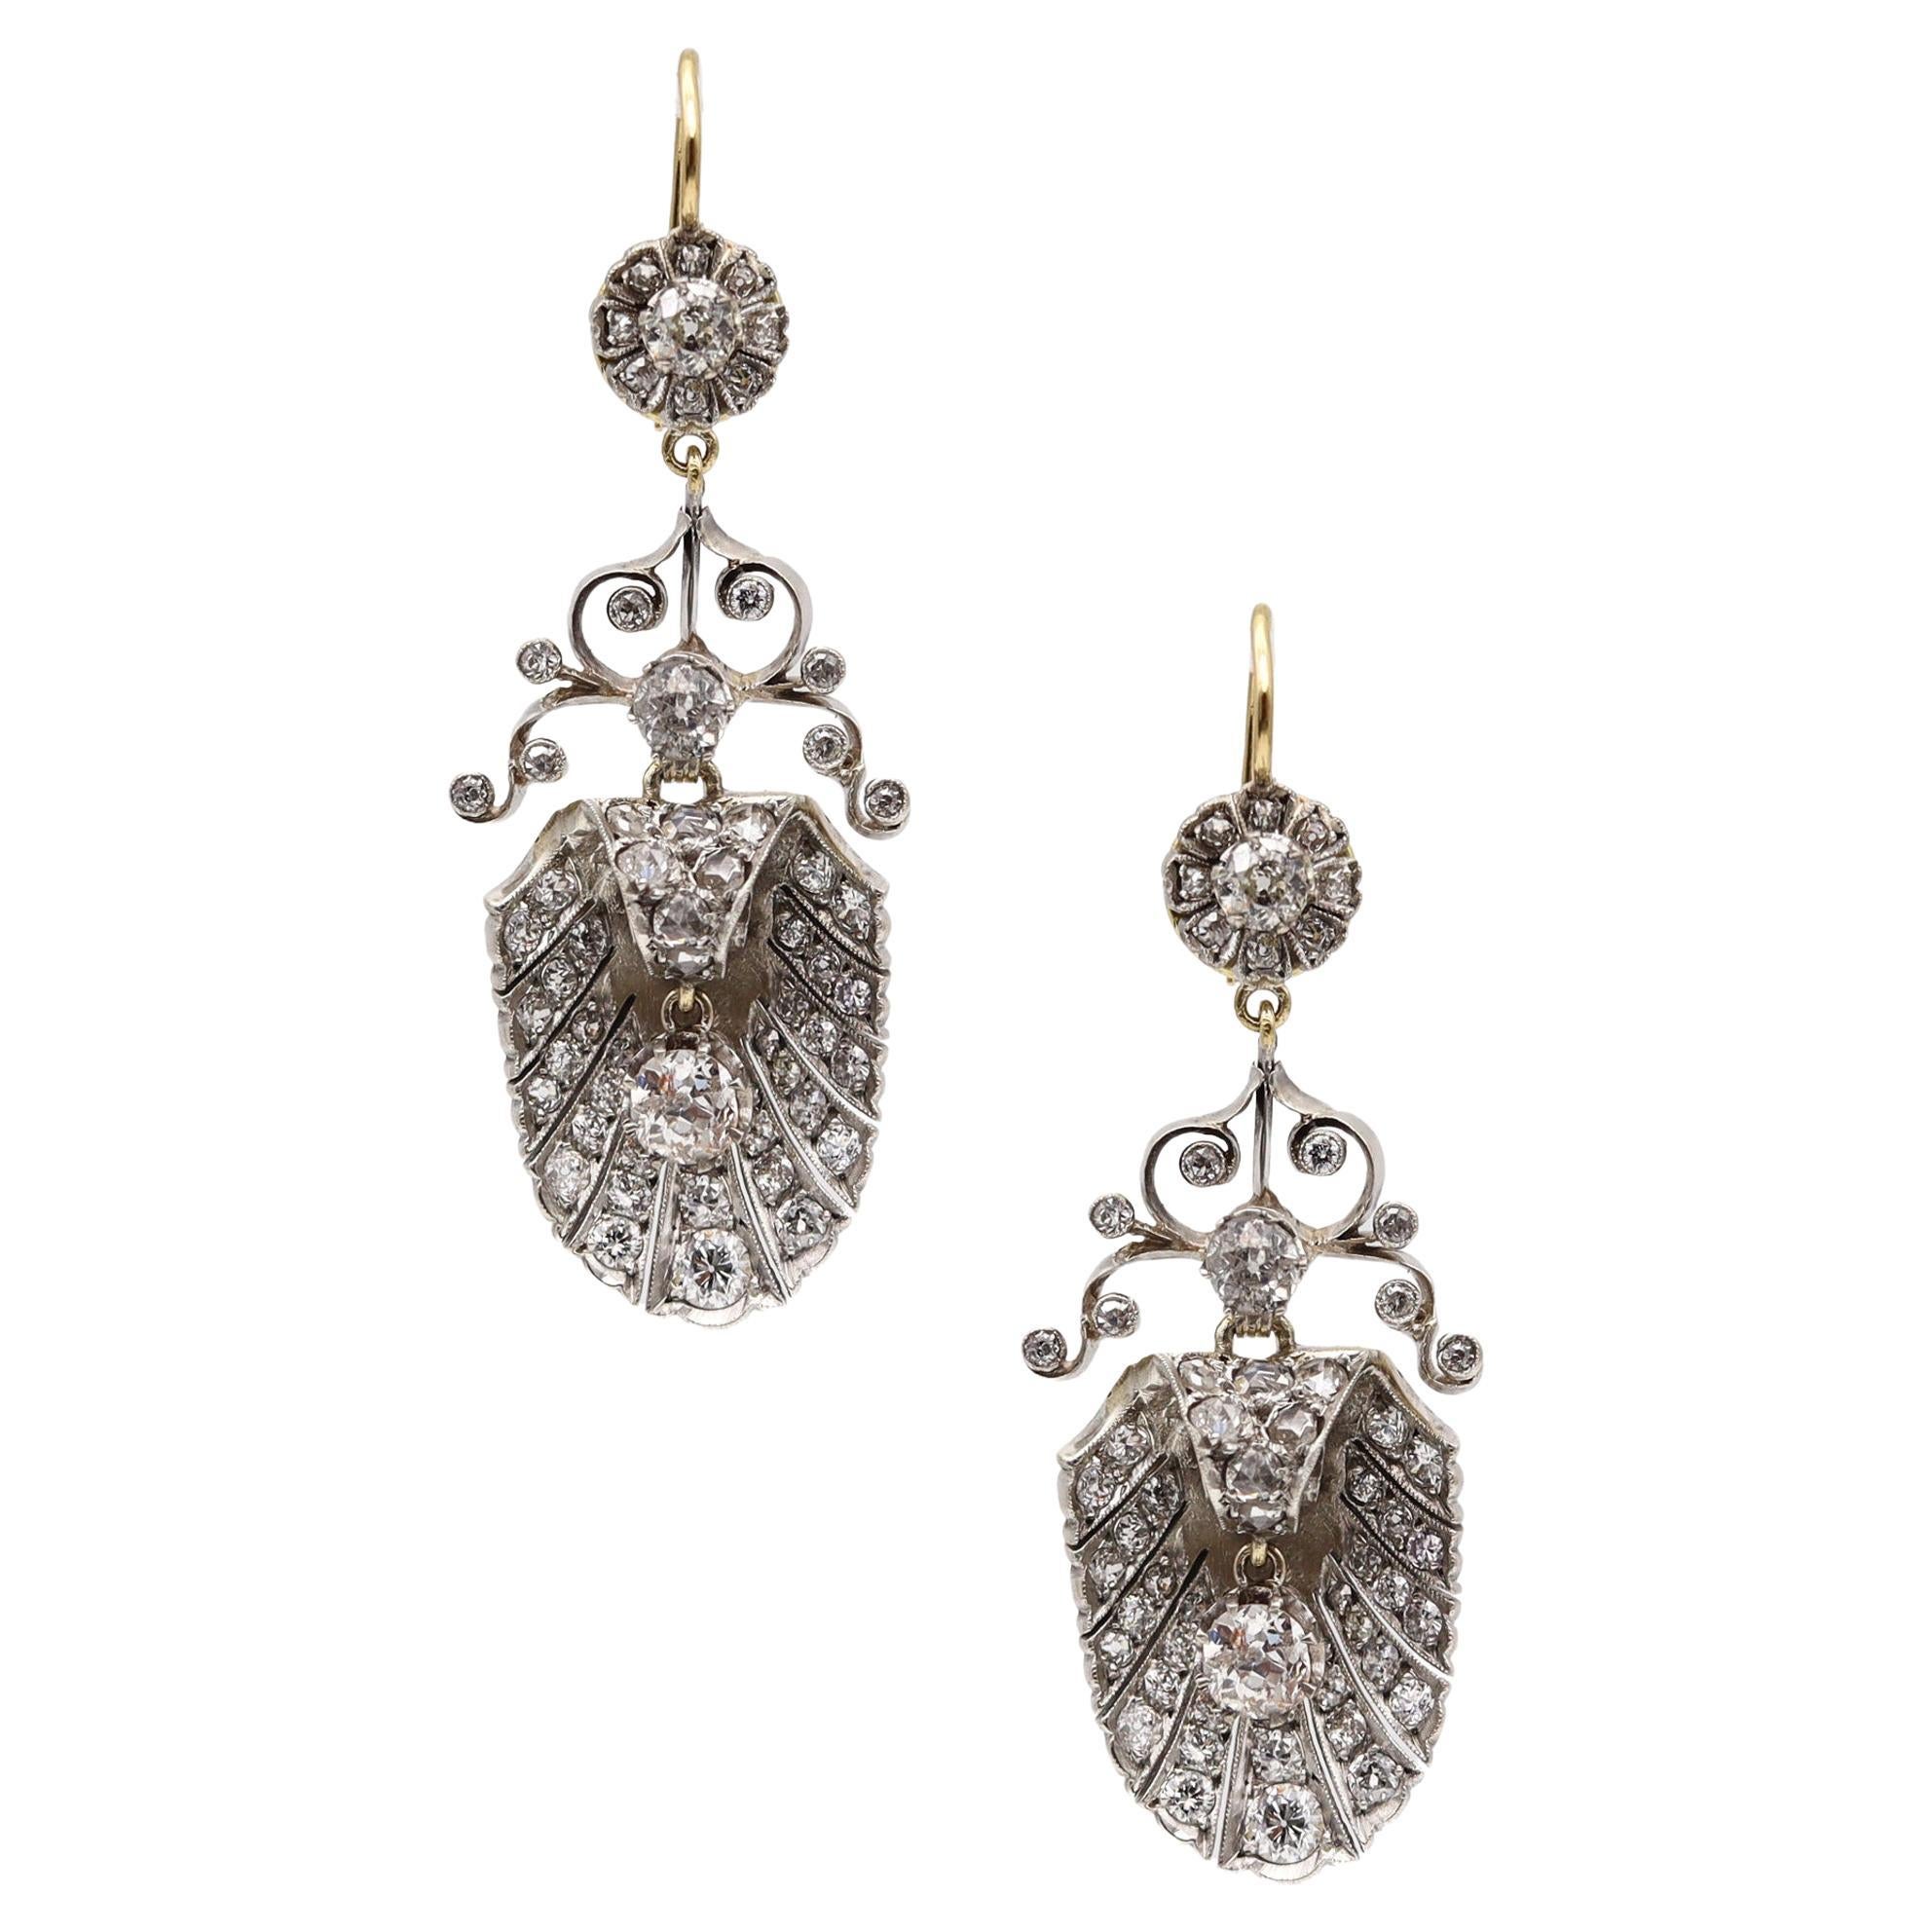 Georgian 1800 Antique Dangle Earrings In 15Kt Gold With 8.46 Ctw In Diamonds For Sale